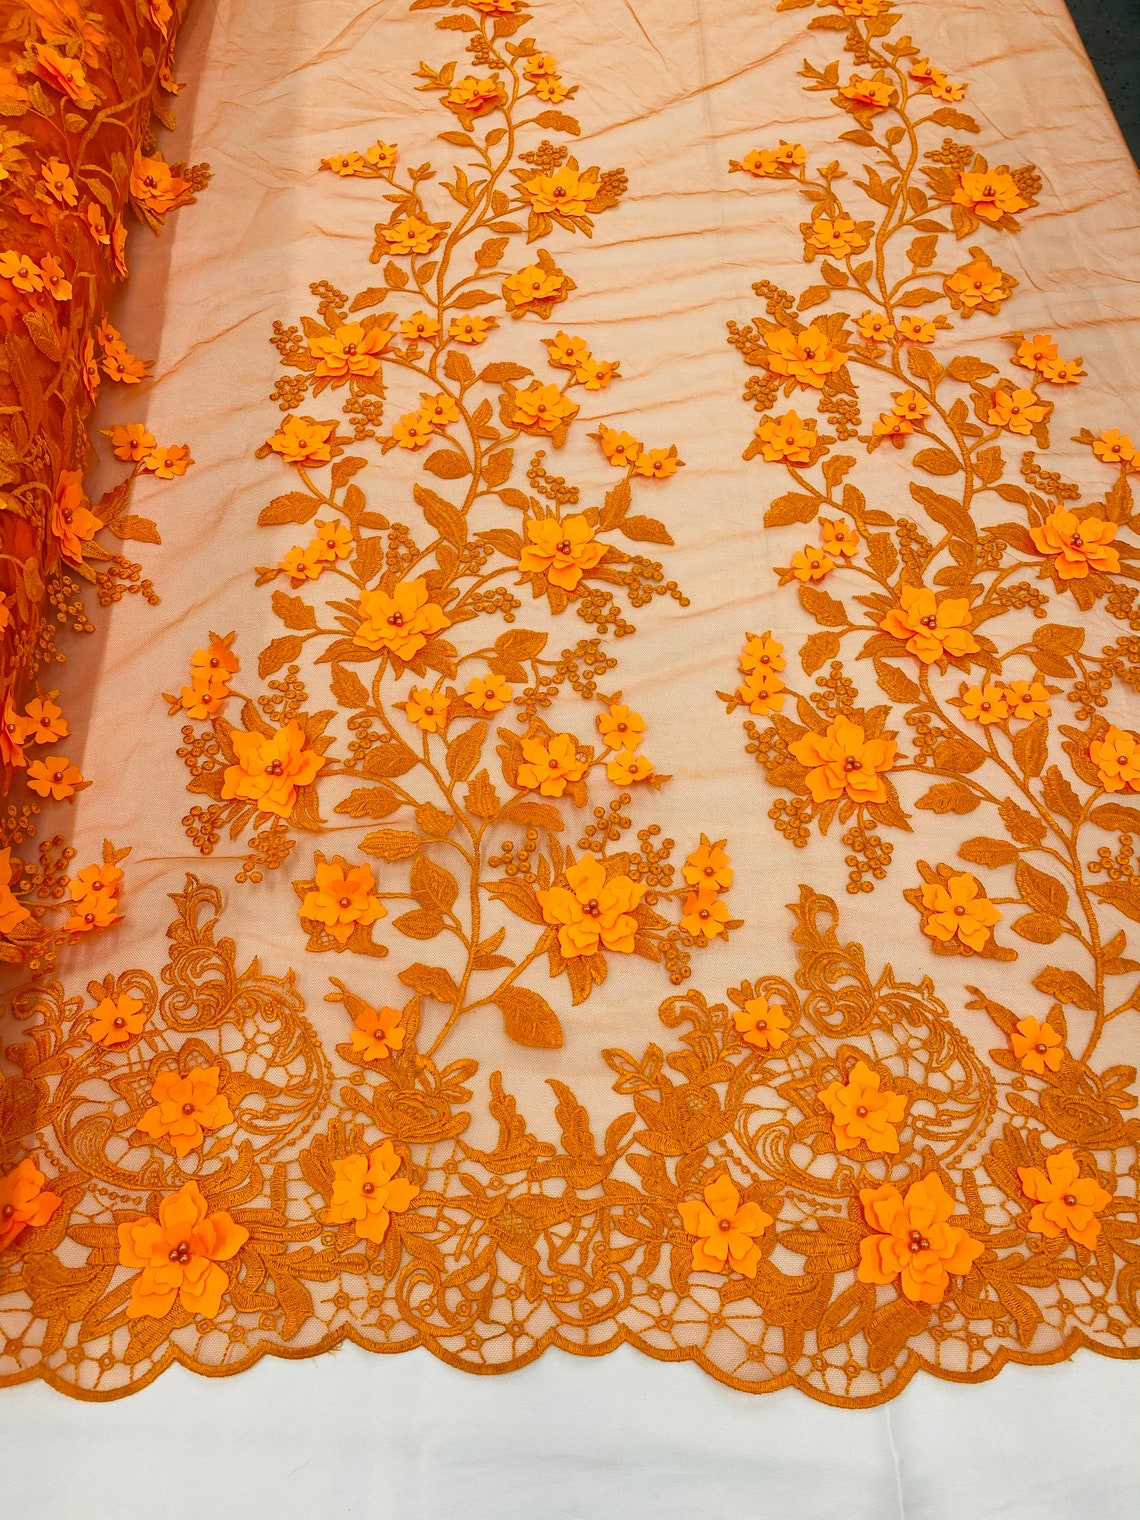 3D Floral Princess Fabric - Orange - Embroidered Floral Lace Fabric with 3D Flowers By Yard